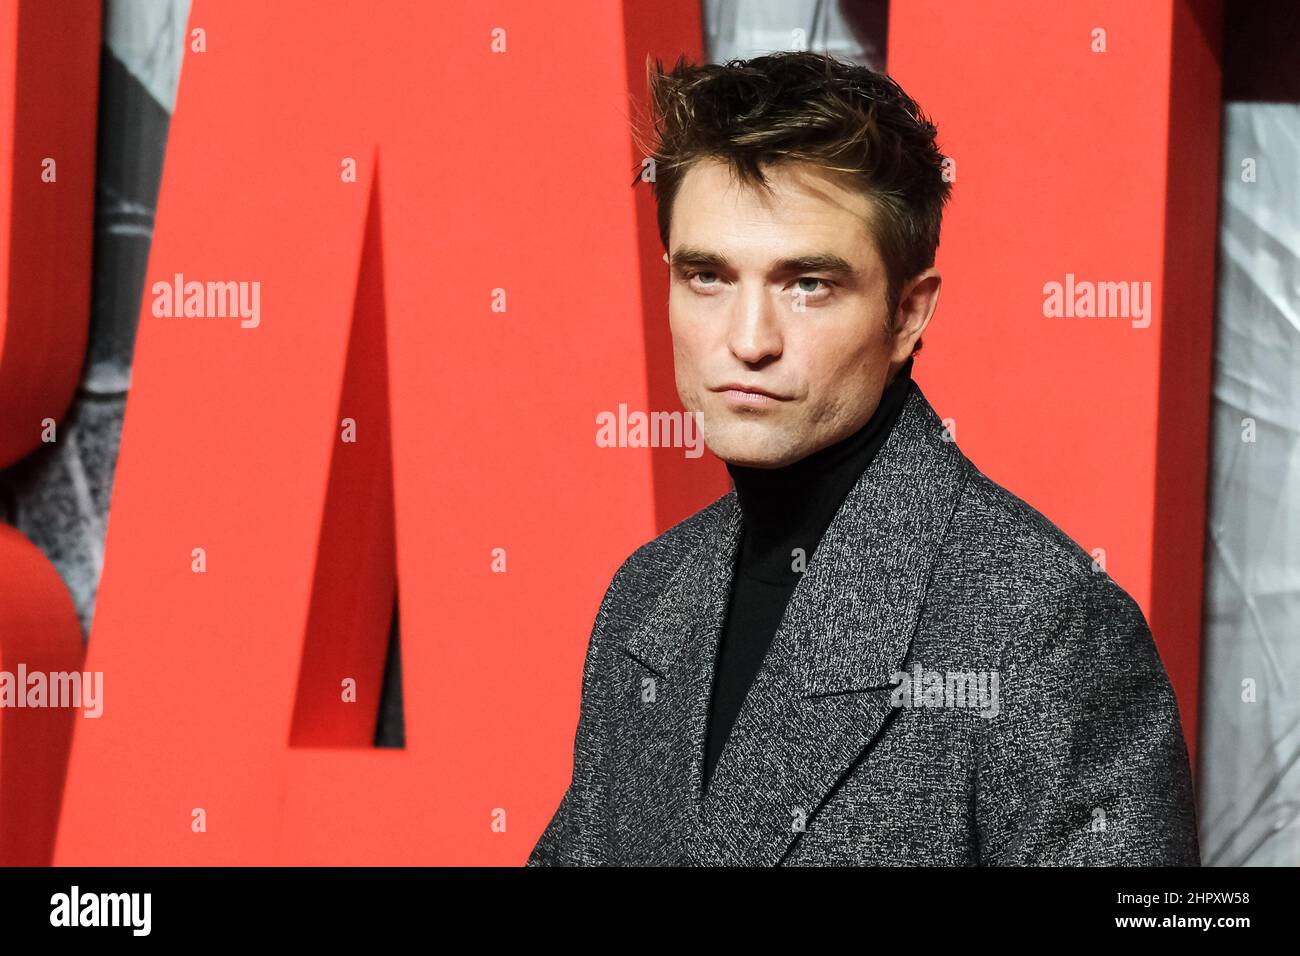 BFI IMAX, London, UK. 23rd Feb, 2022. Robert Pattinson attends the Special Screening of "The Batman". Picture by Credit: Julie Edwards/Alamy Live News Stock Photo